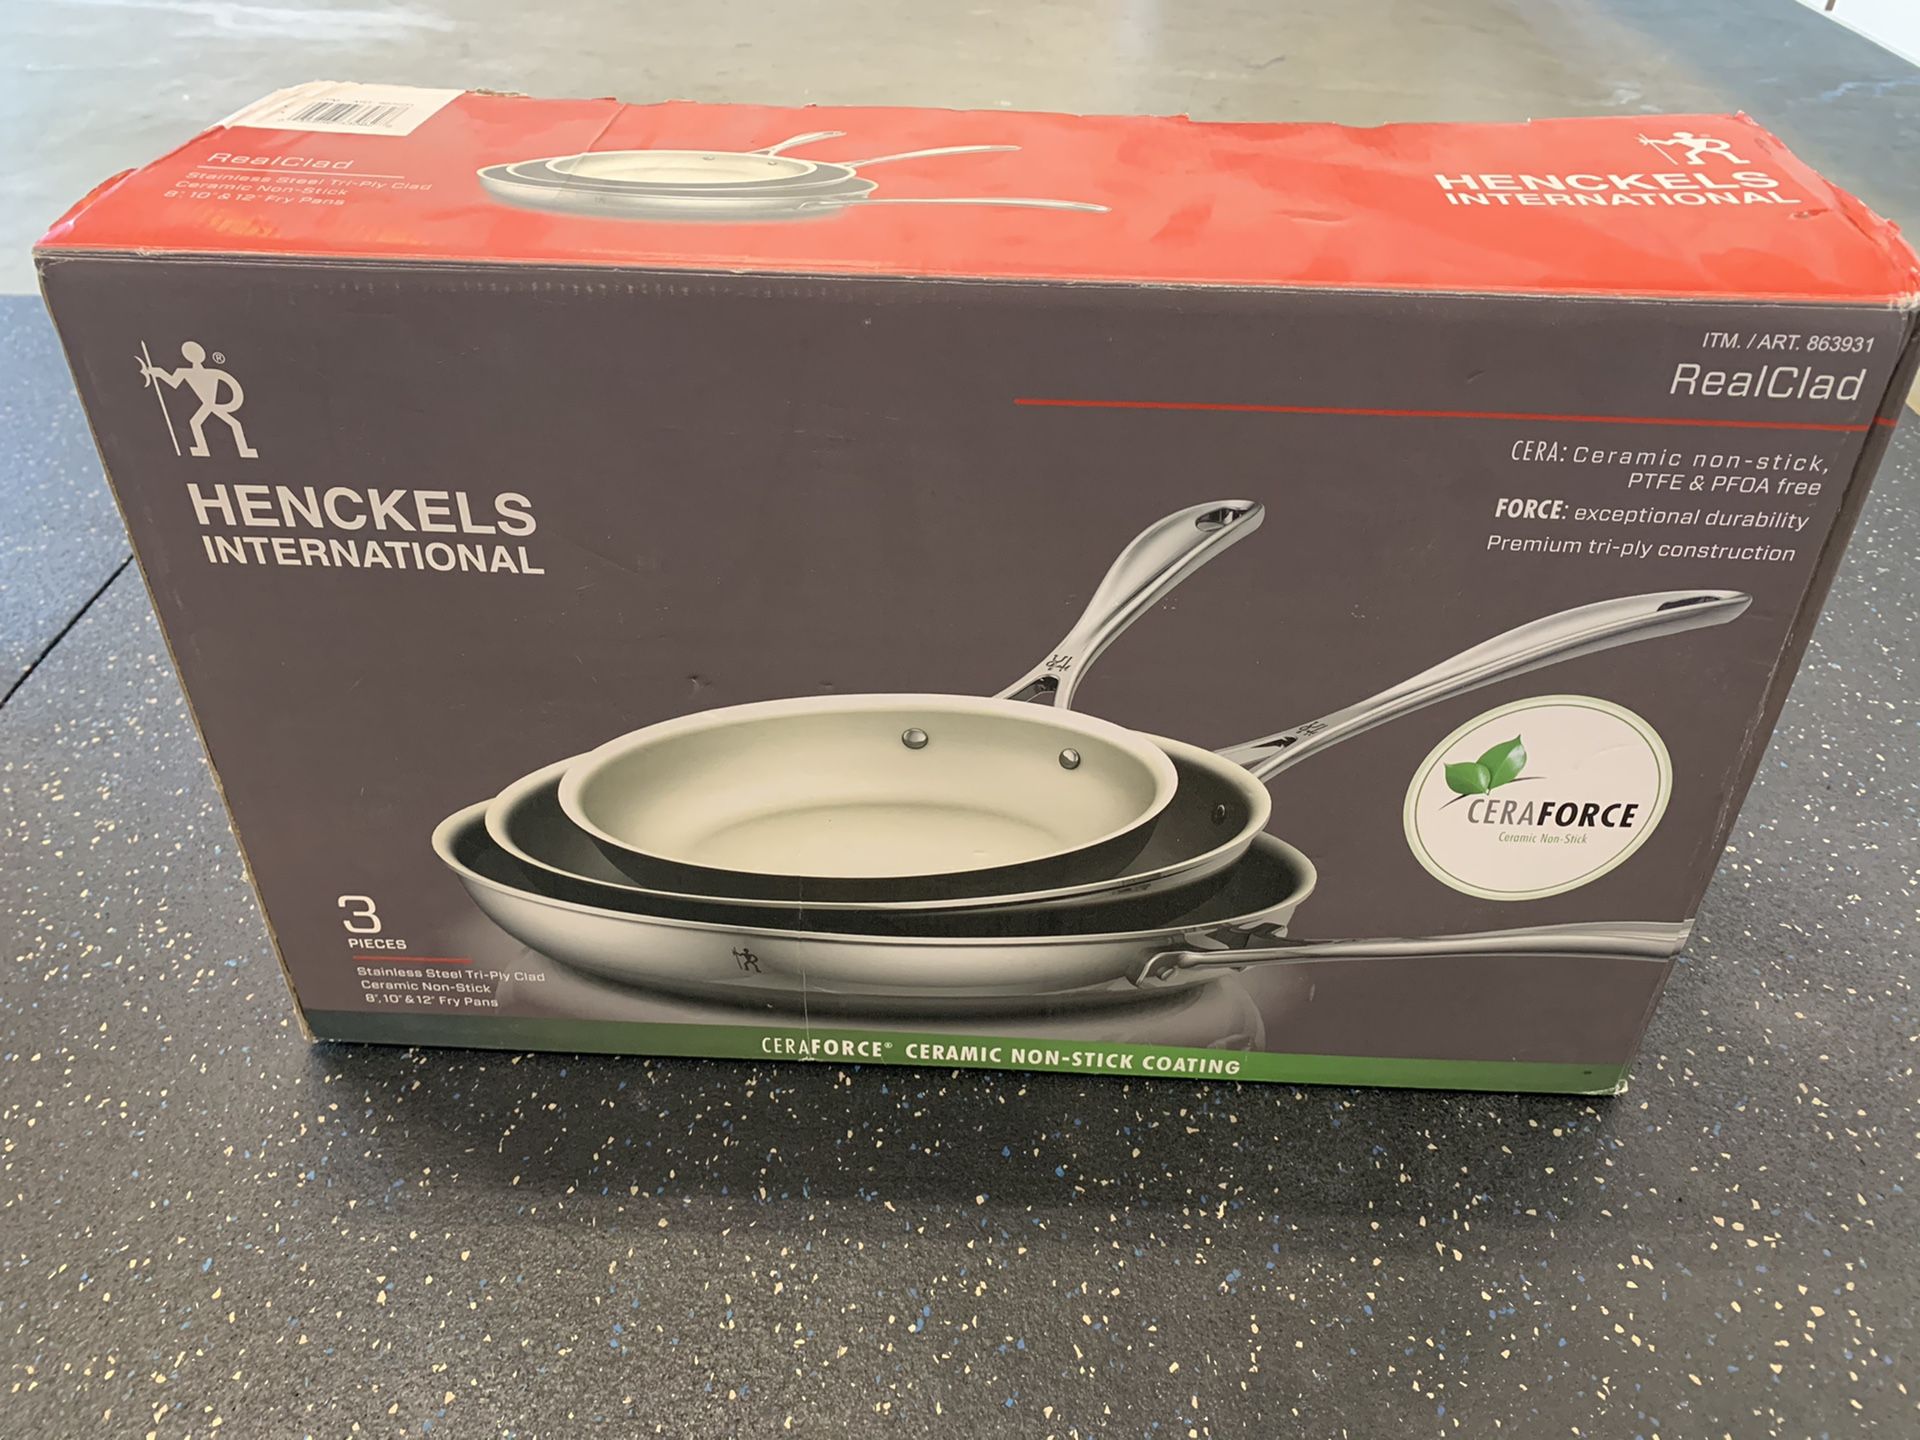 Henckels International Stainless Steel Tri-Ply Clad Ceramic Non-Stick Fry Pans 8”, 10” & 12”